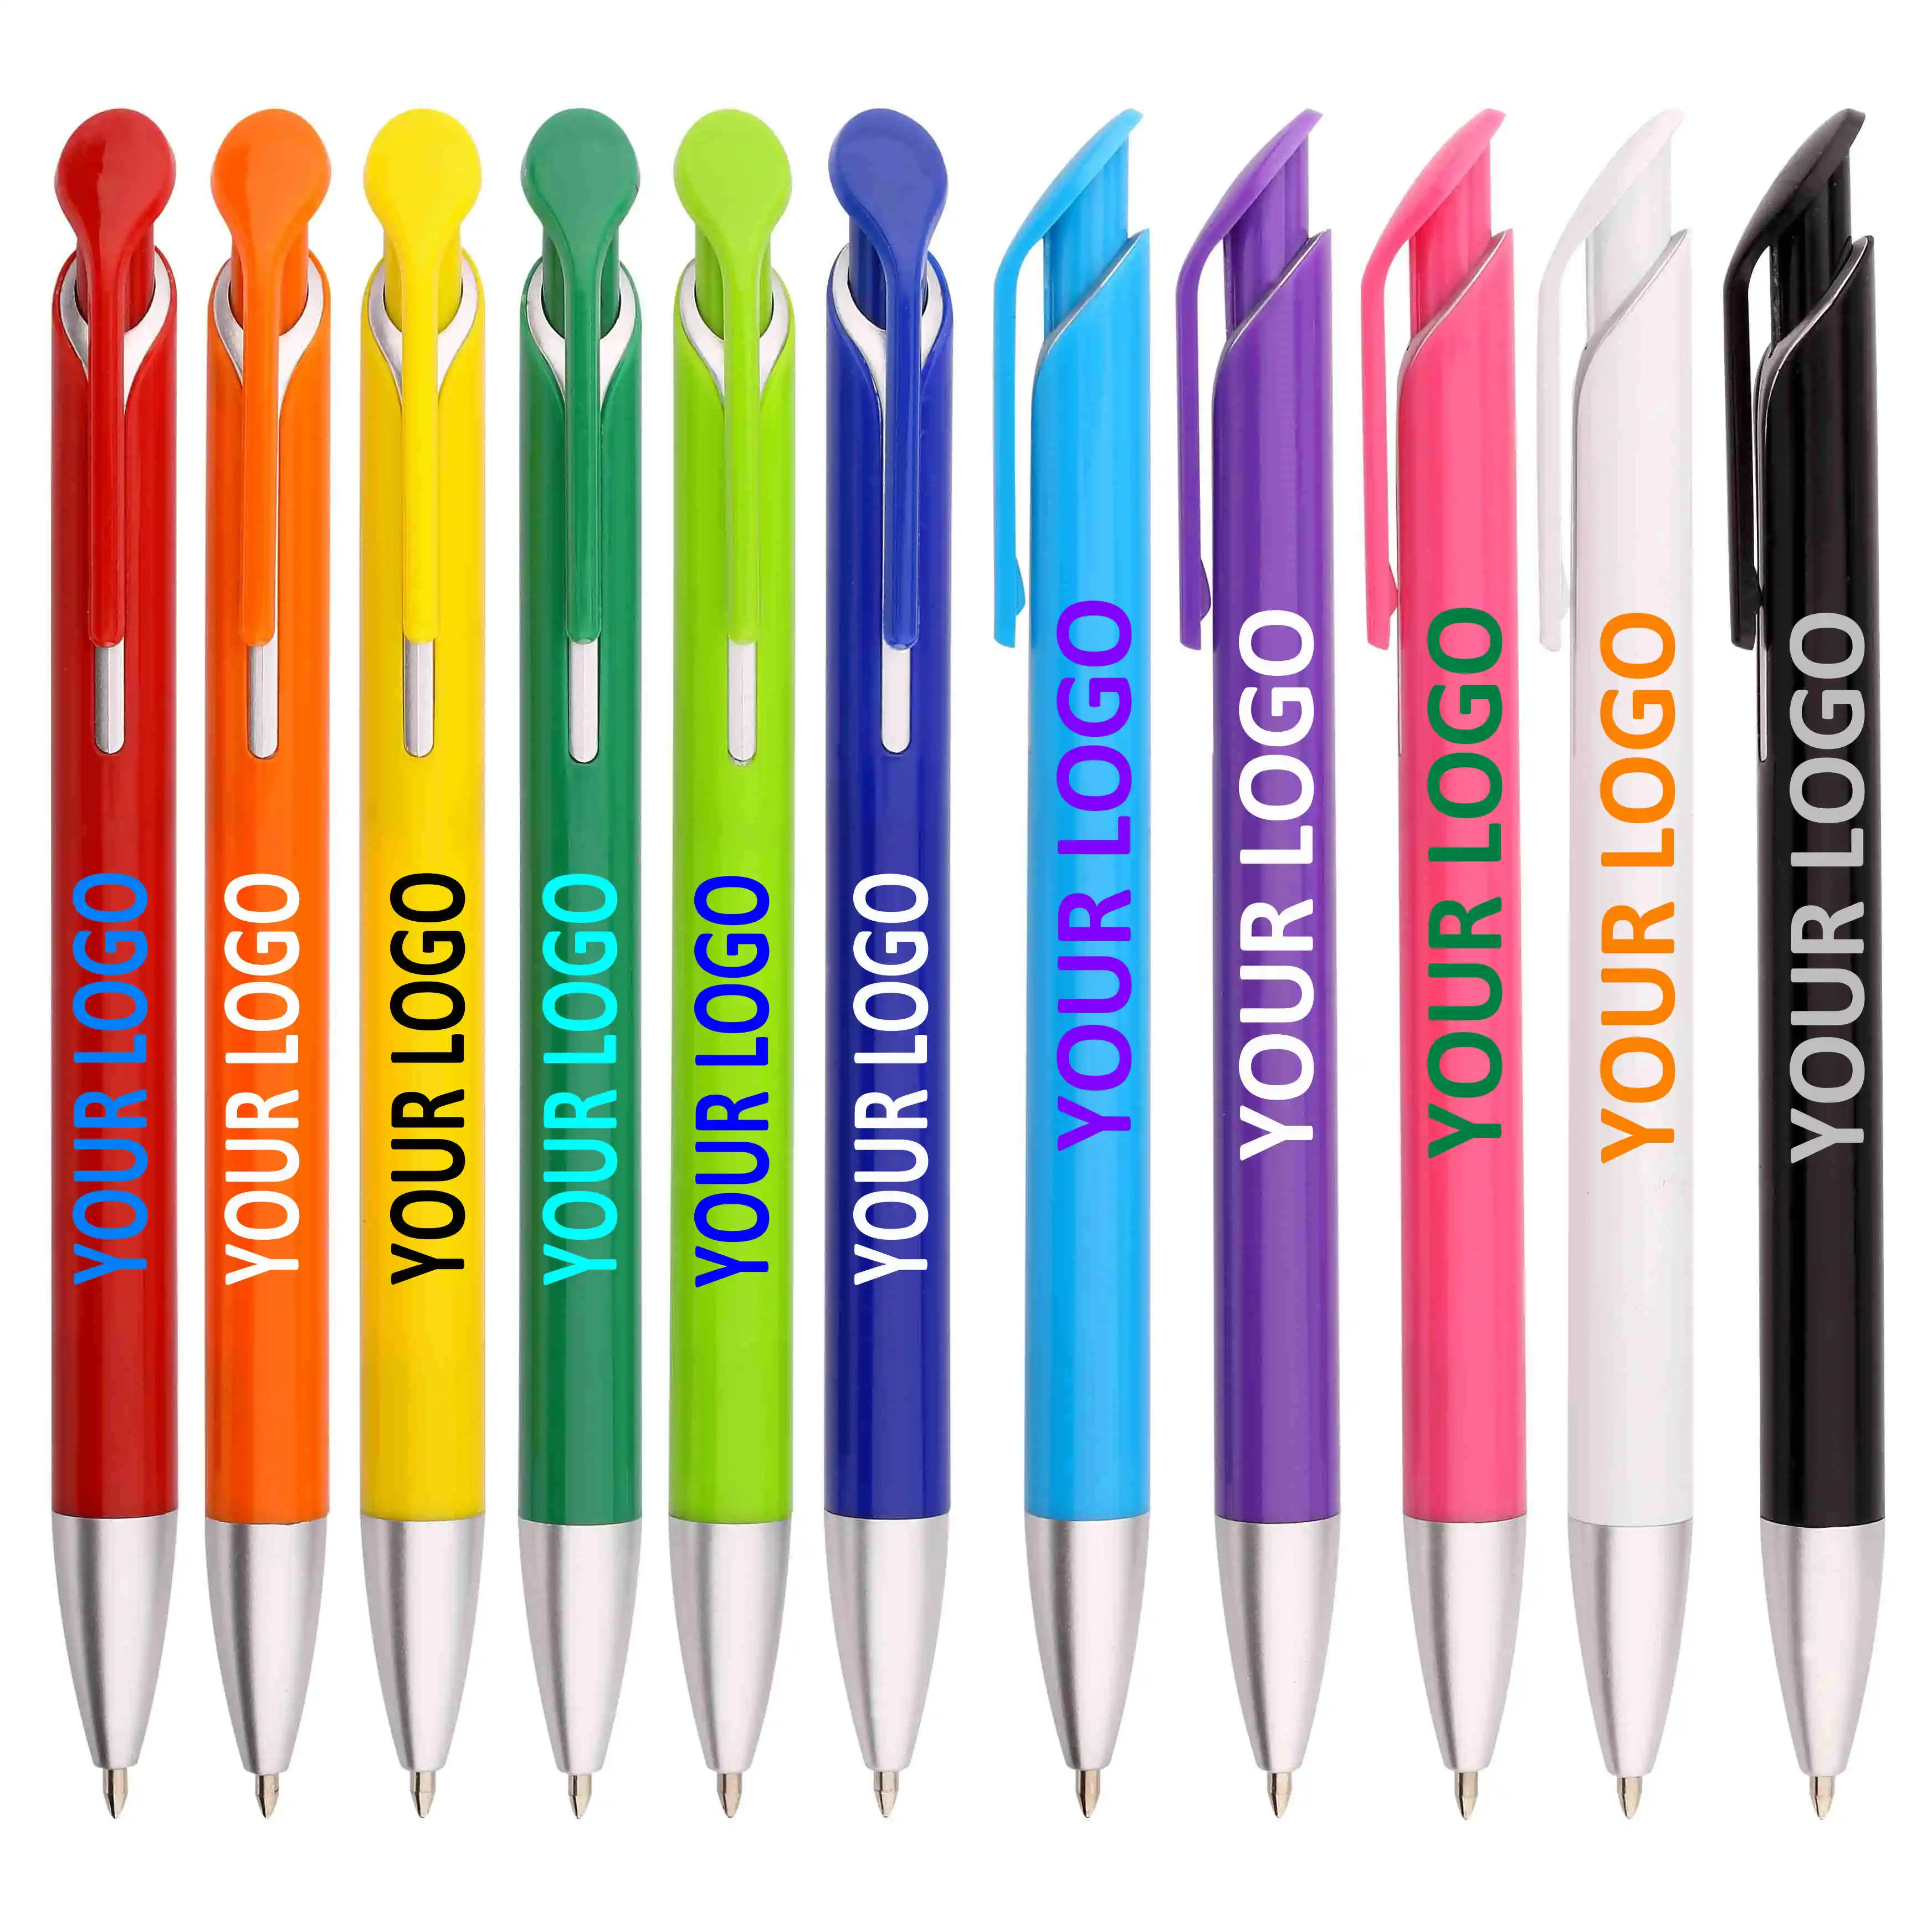 Plastic smooth ballpoint pens high quality low price retractable 1.0 mm ball point pen ball pens-customized logo and ink